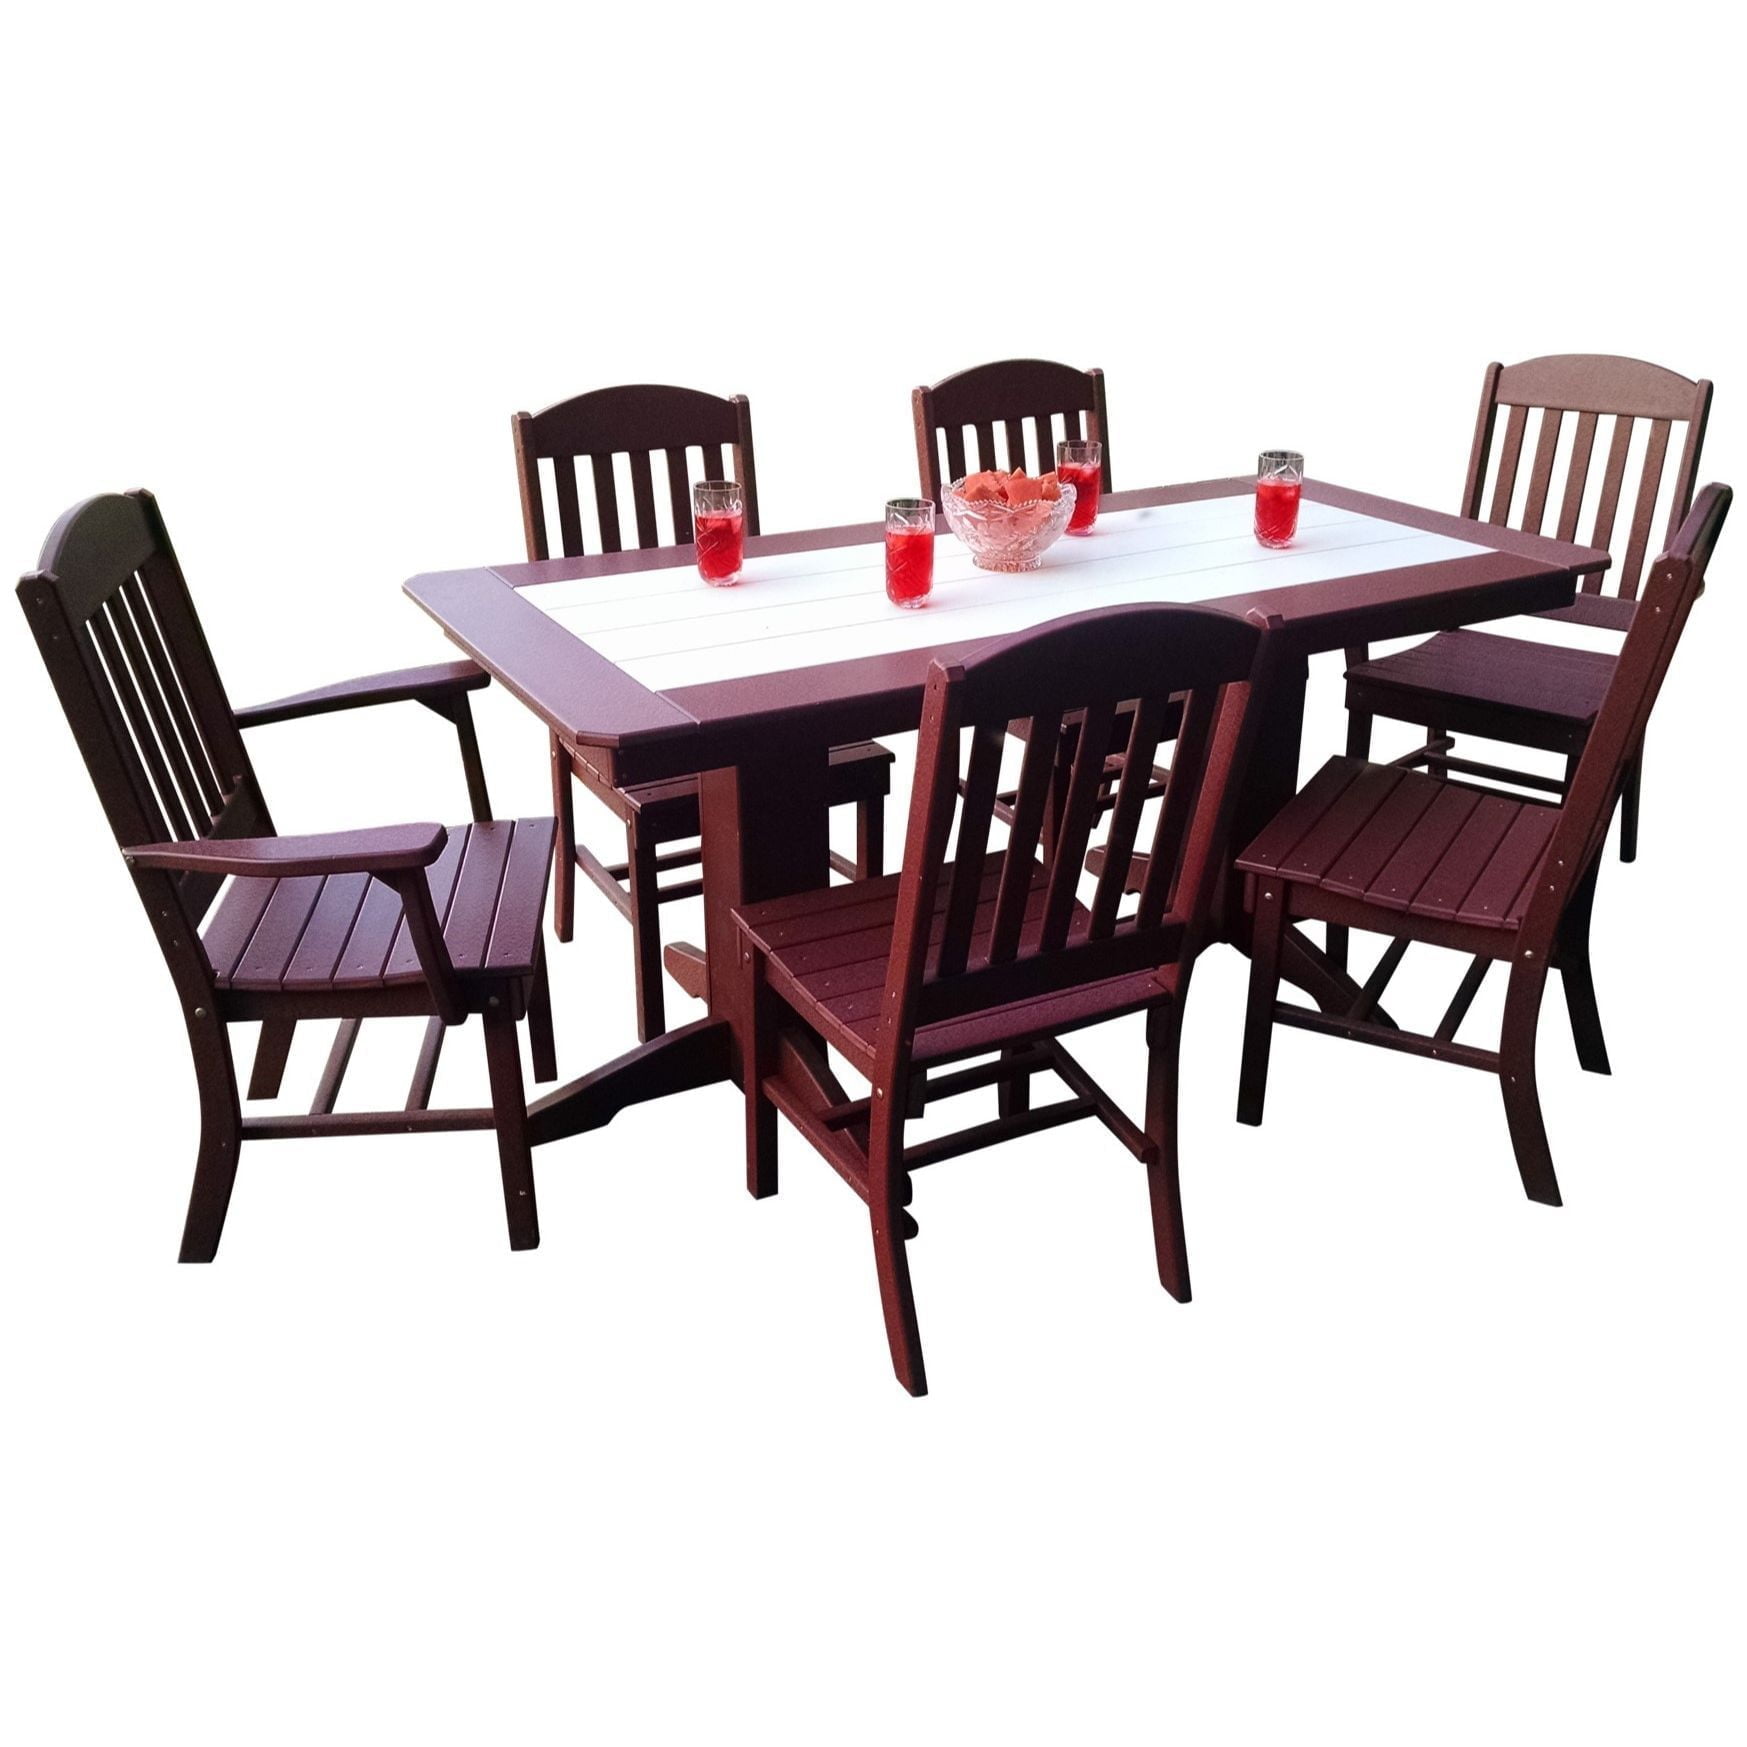 Poly Lumber Classic Dining Chair With Arms